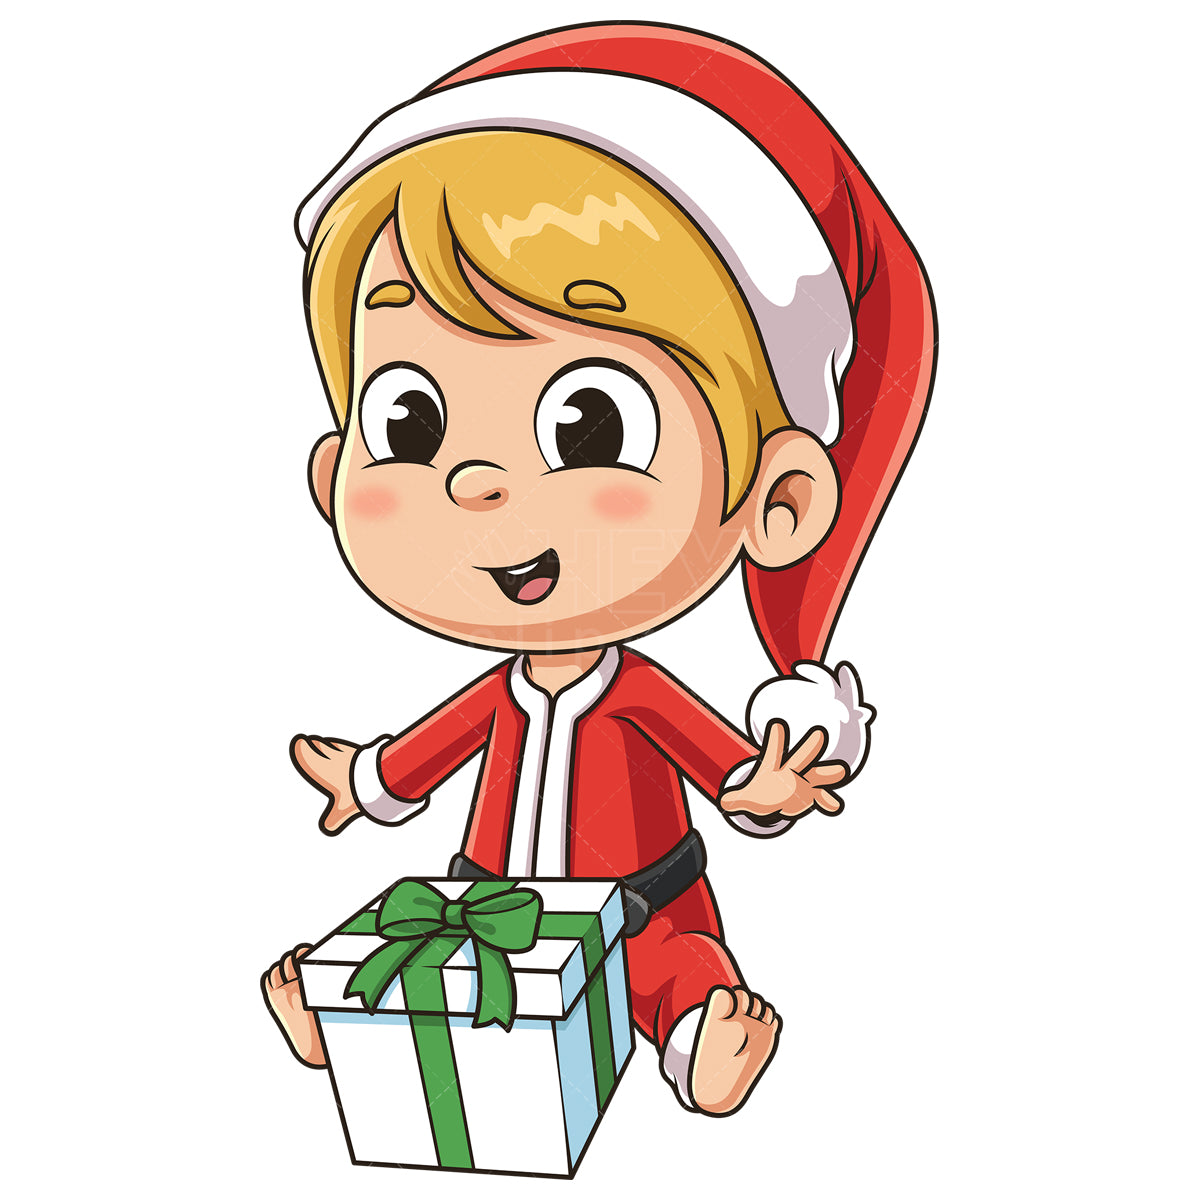 Royalty-free stock vector illustration of a excited baby boy santa with christmas gift.